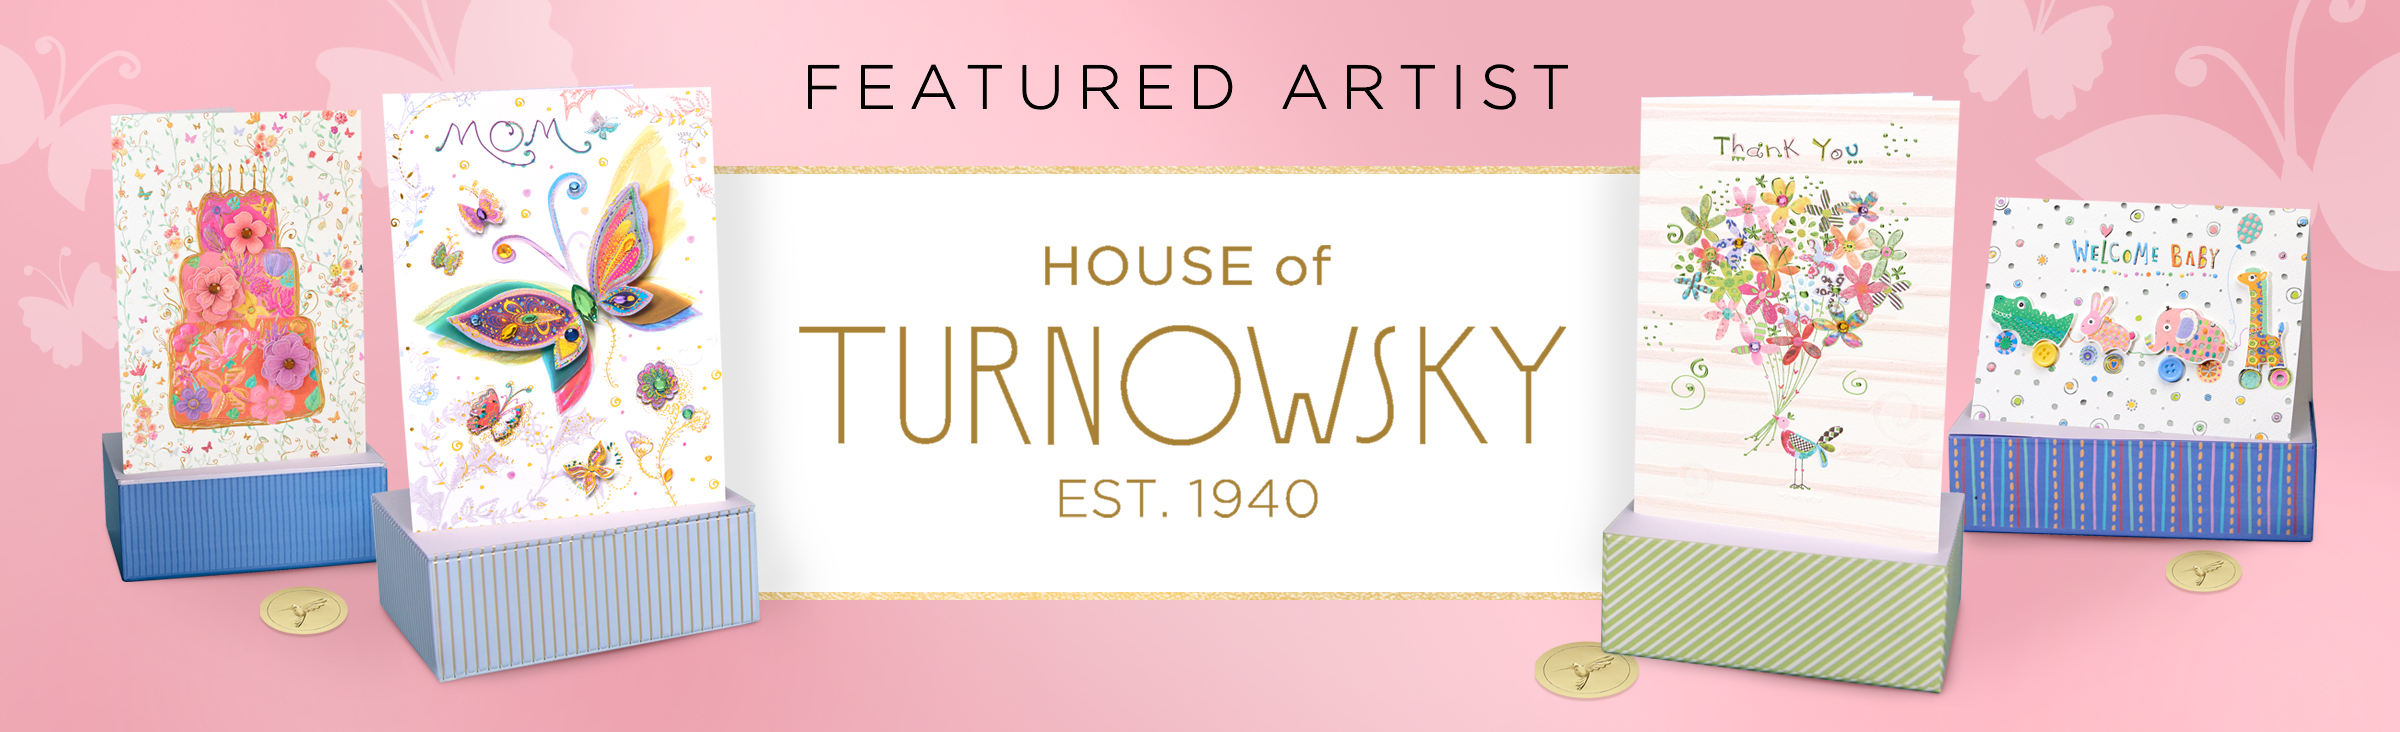 Featured Artist House of Turnowsky est. 1940